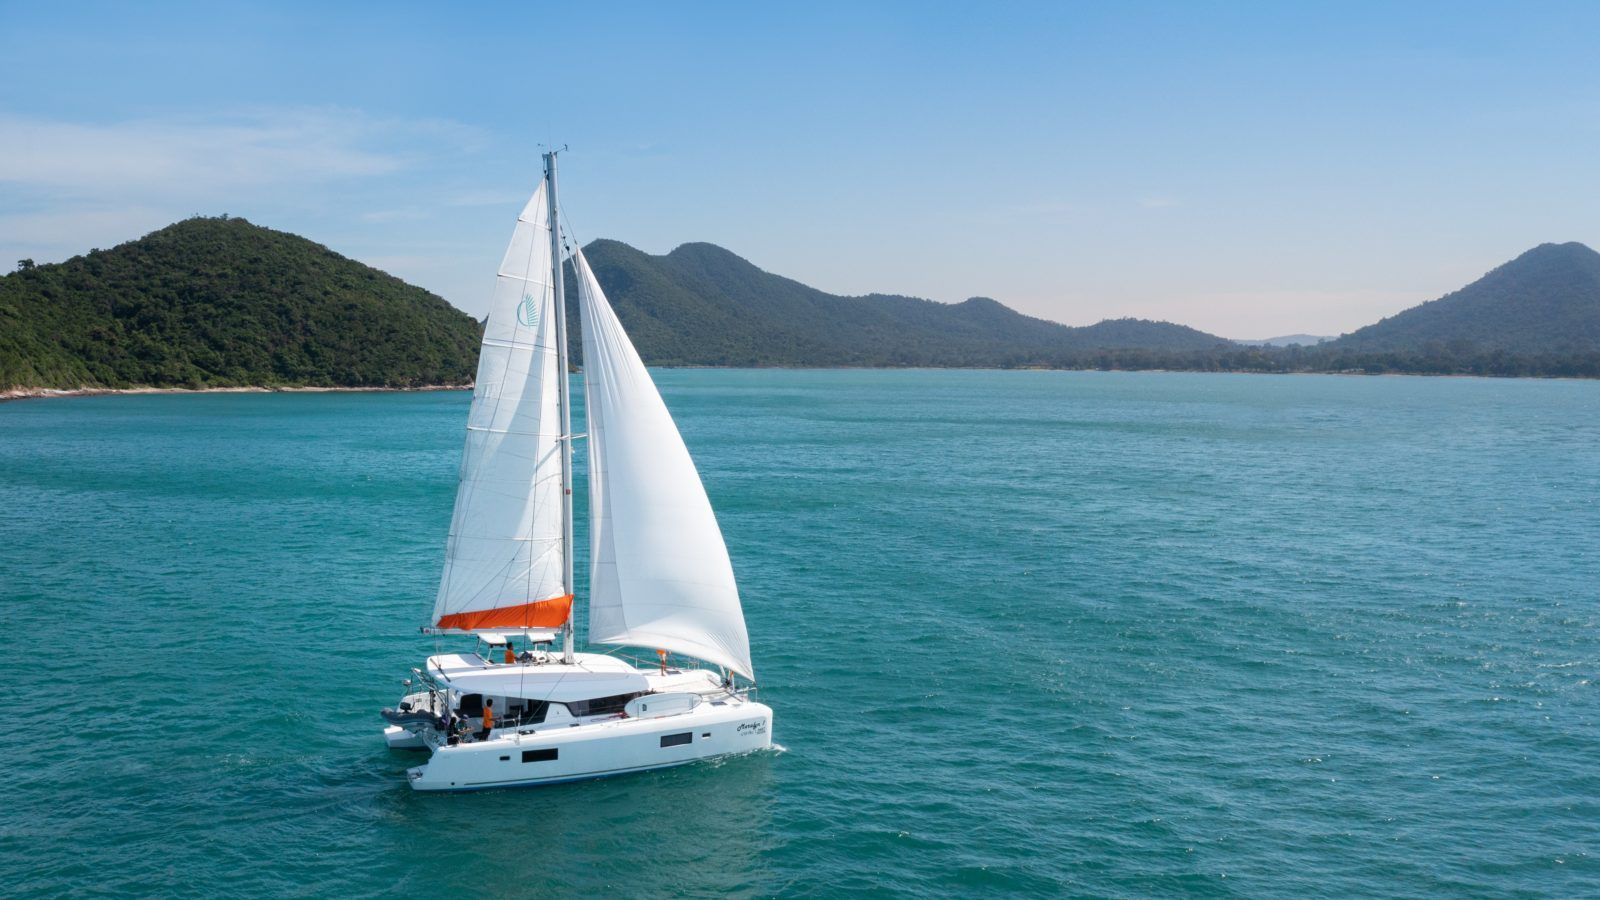 5 Luxury Yacht Charters to Bookmark For Your Next Trip on the Water